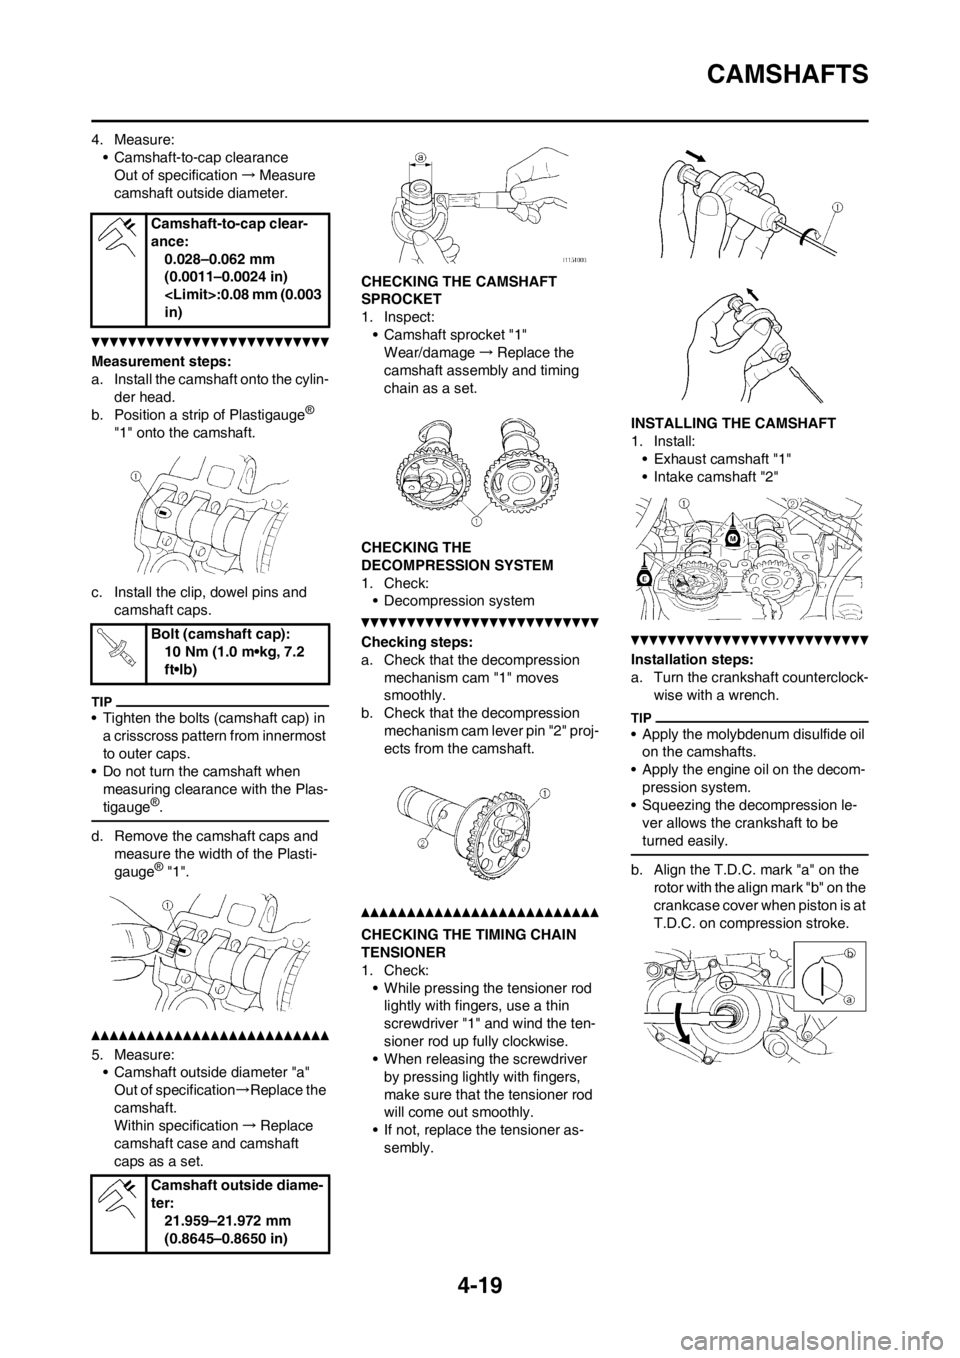 YAMAHA YZ250F 2013 User Guide 4-19
CAMSHAFTS
4. Measure:
• Camshaft-to-cap clearance
Out of specification→Measure 
camshaft outside diameter.
Measurement steps:
a. Install the camshaft onto the cylin-
der head.
b. Position a s